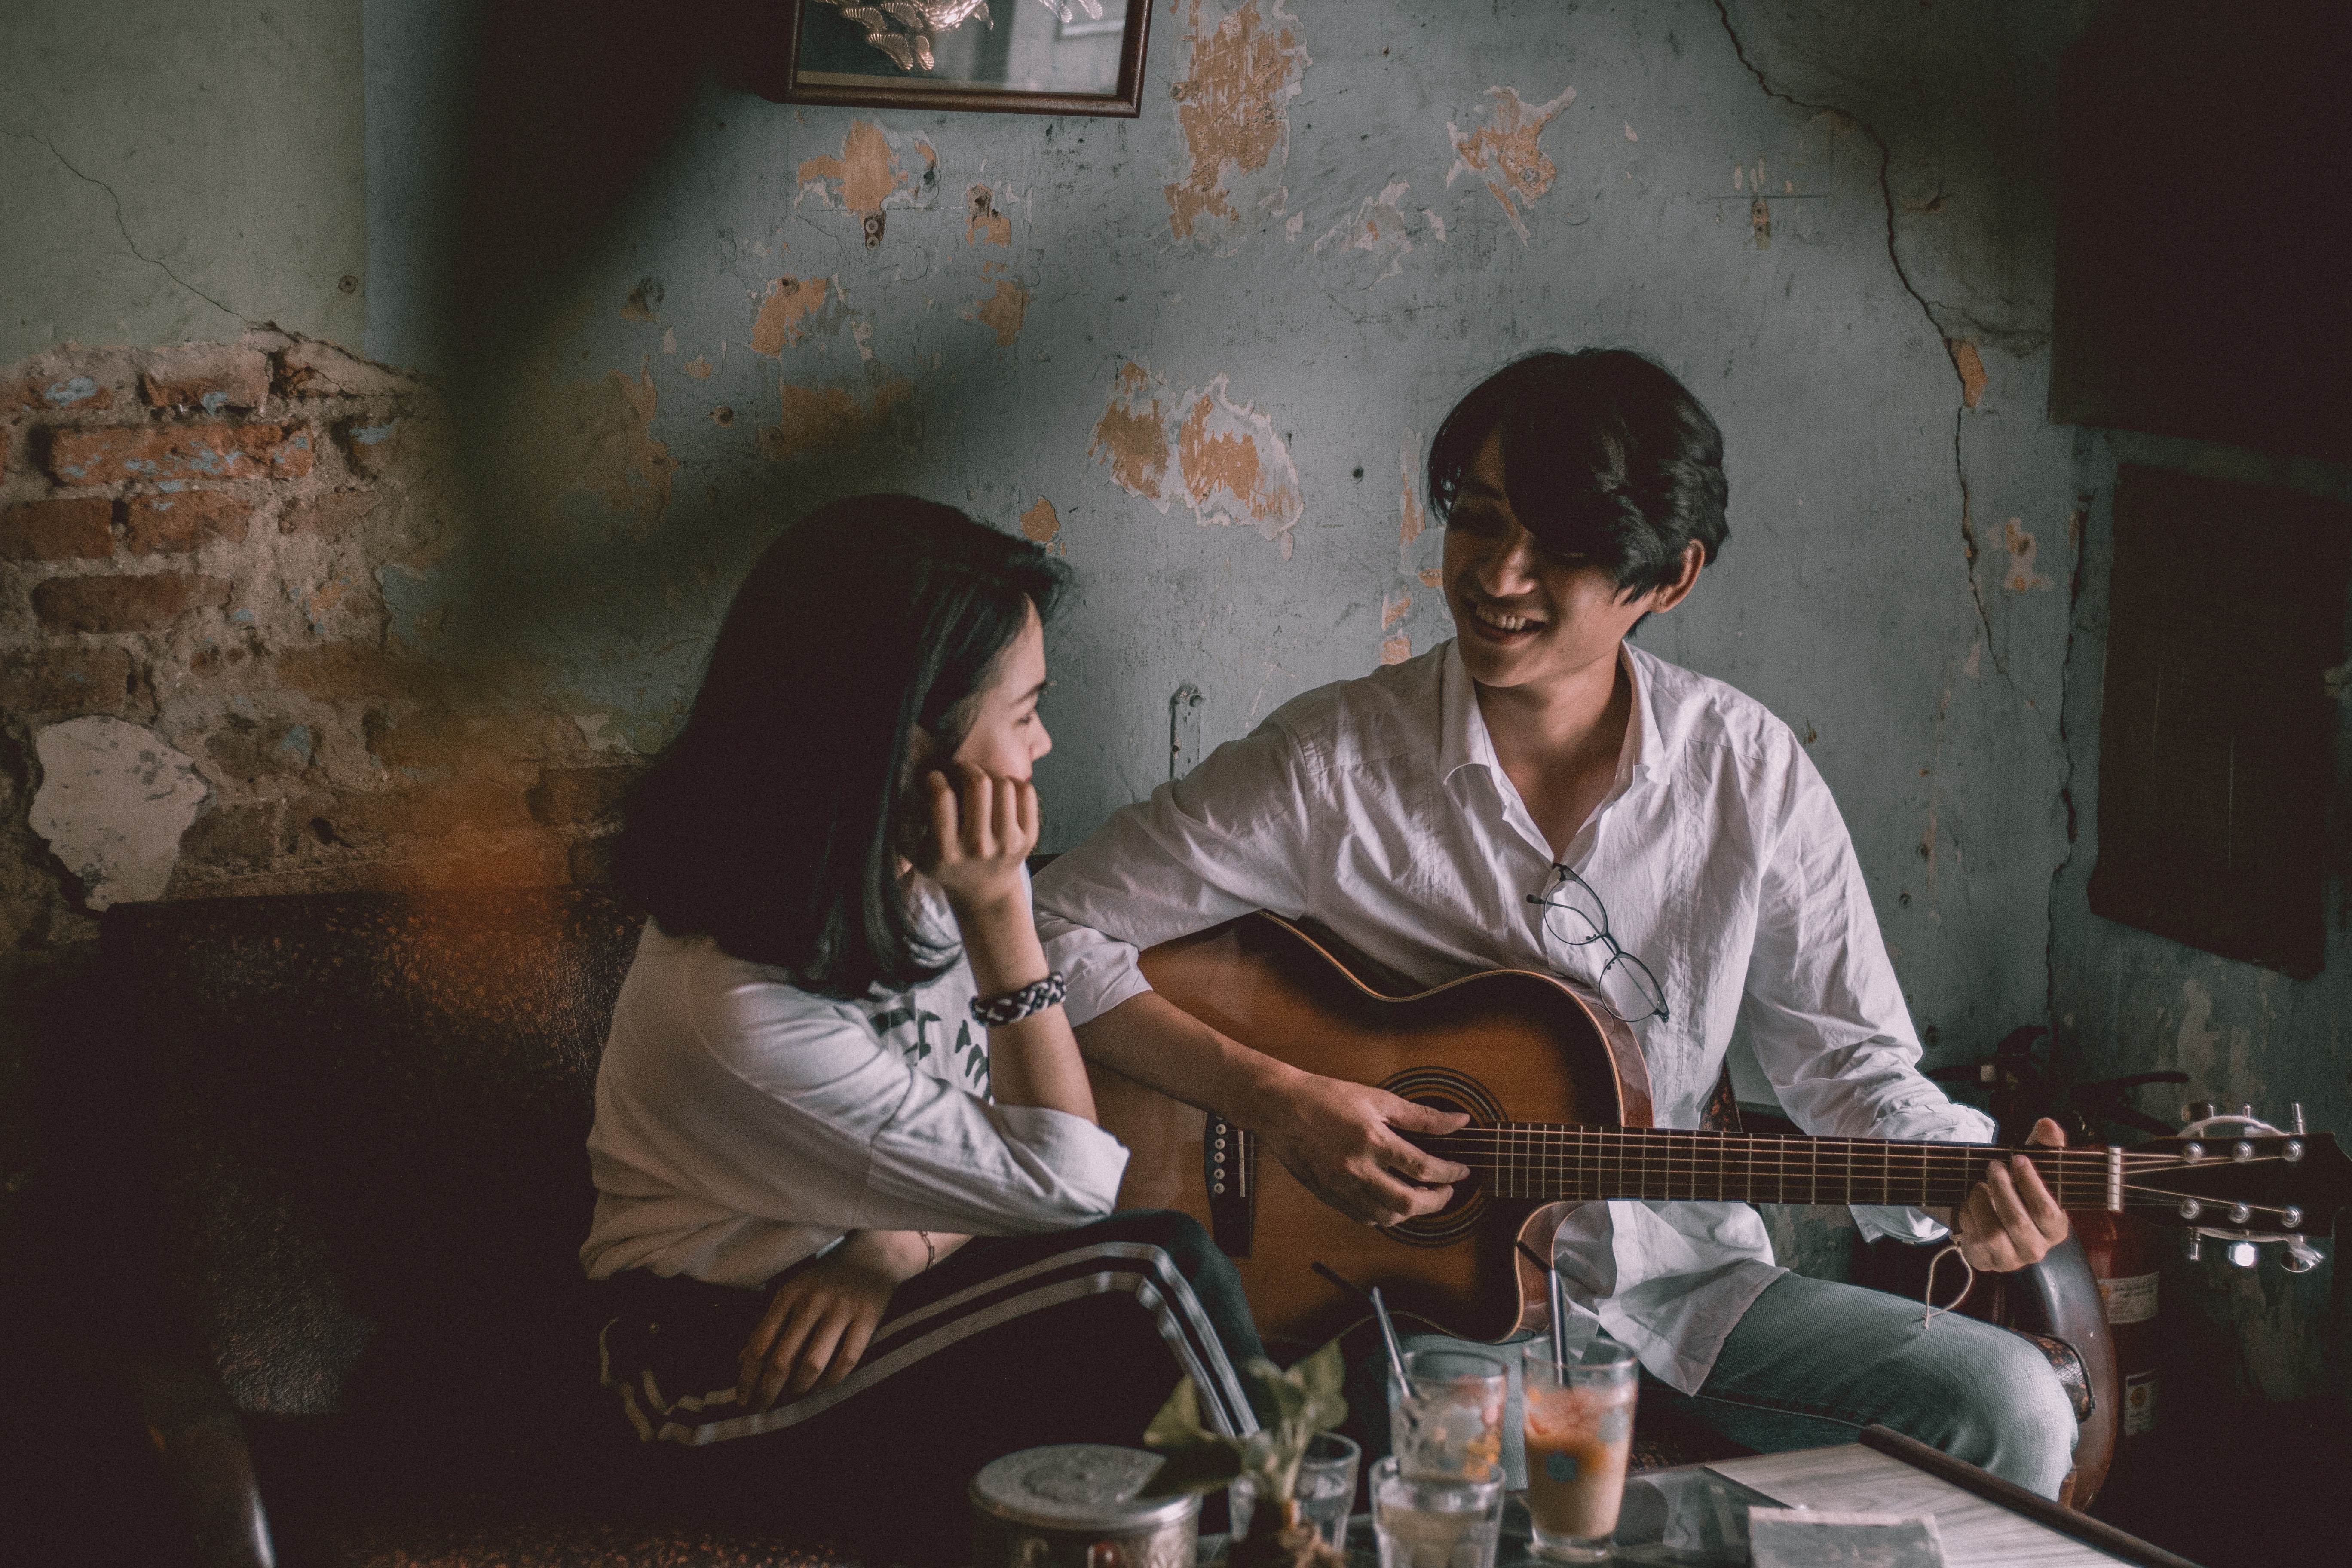 A man playing the guitar for a woman. | Source: Pexels